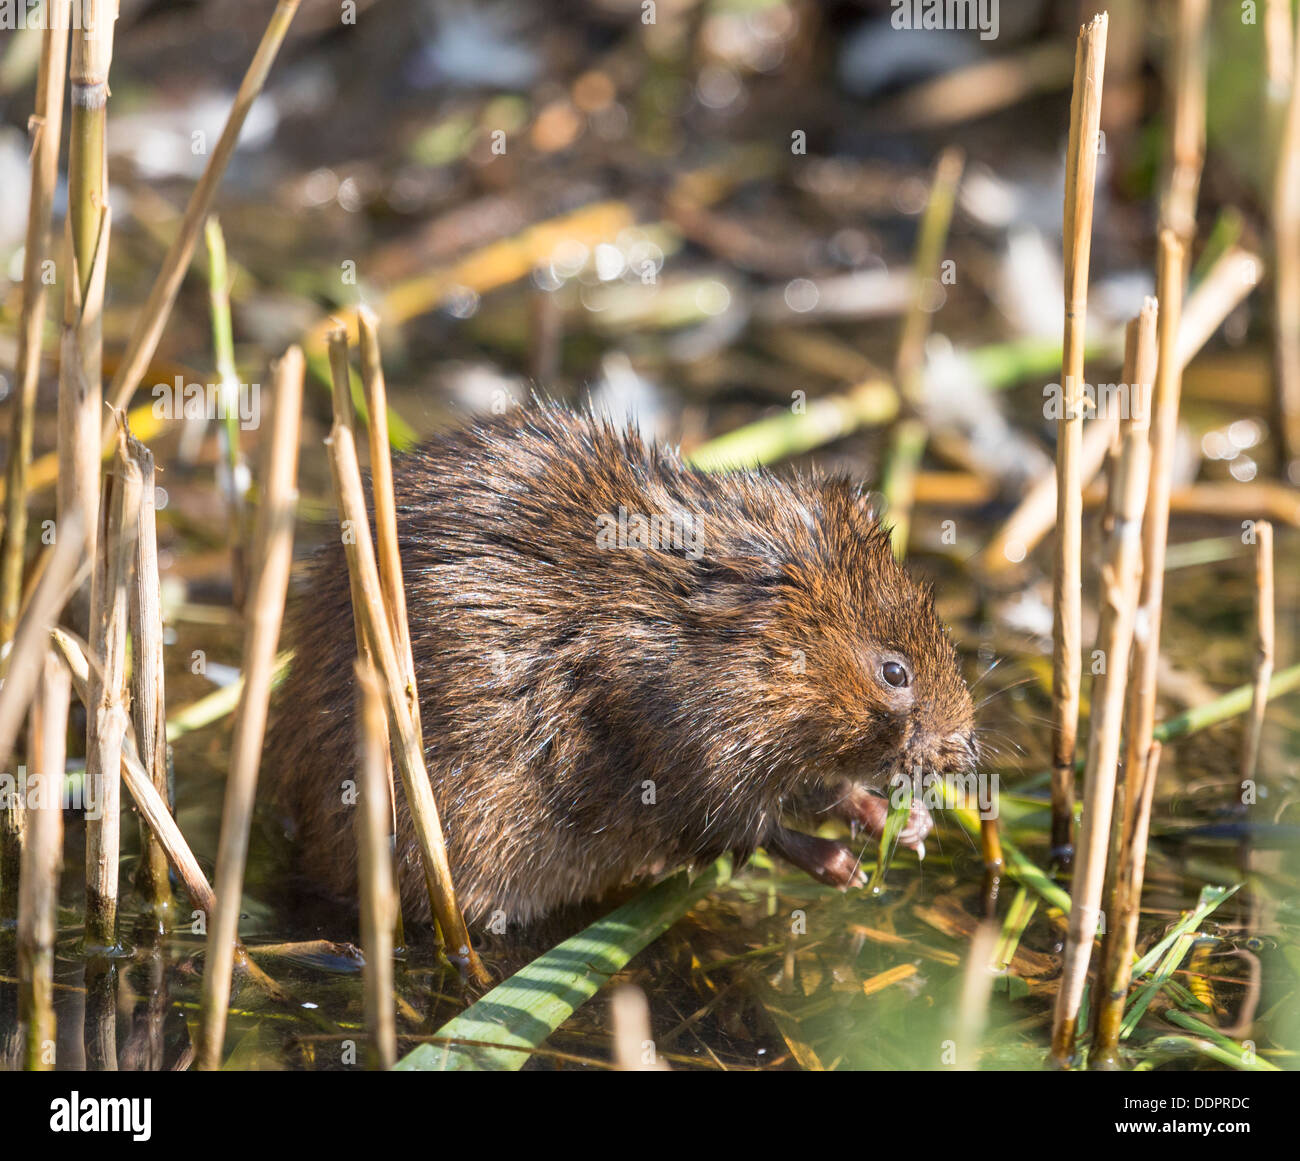 Native fauna, the European water vole (Arvicola amphibius), feeding in reeds at Wildfowl & Wetlands Trust, Arundel, West Sussex, England Stock Photo